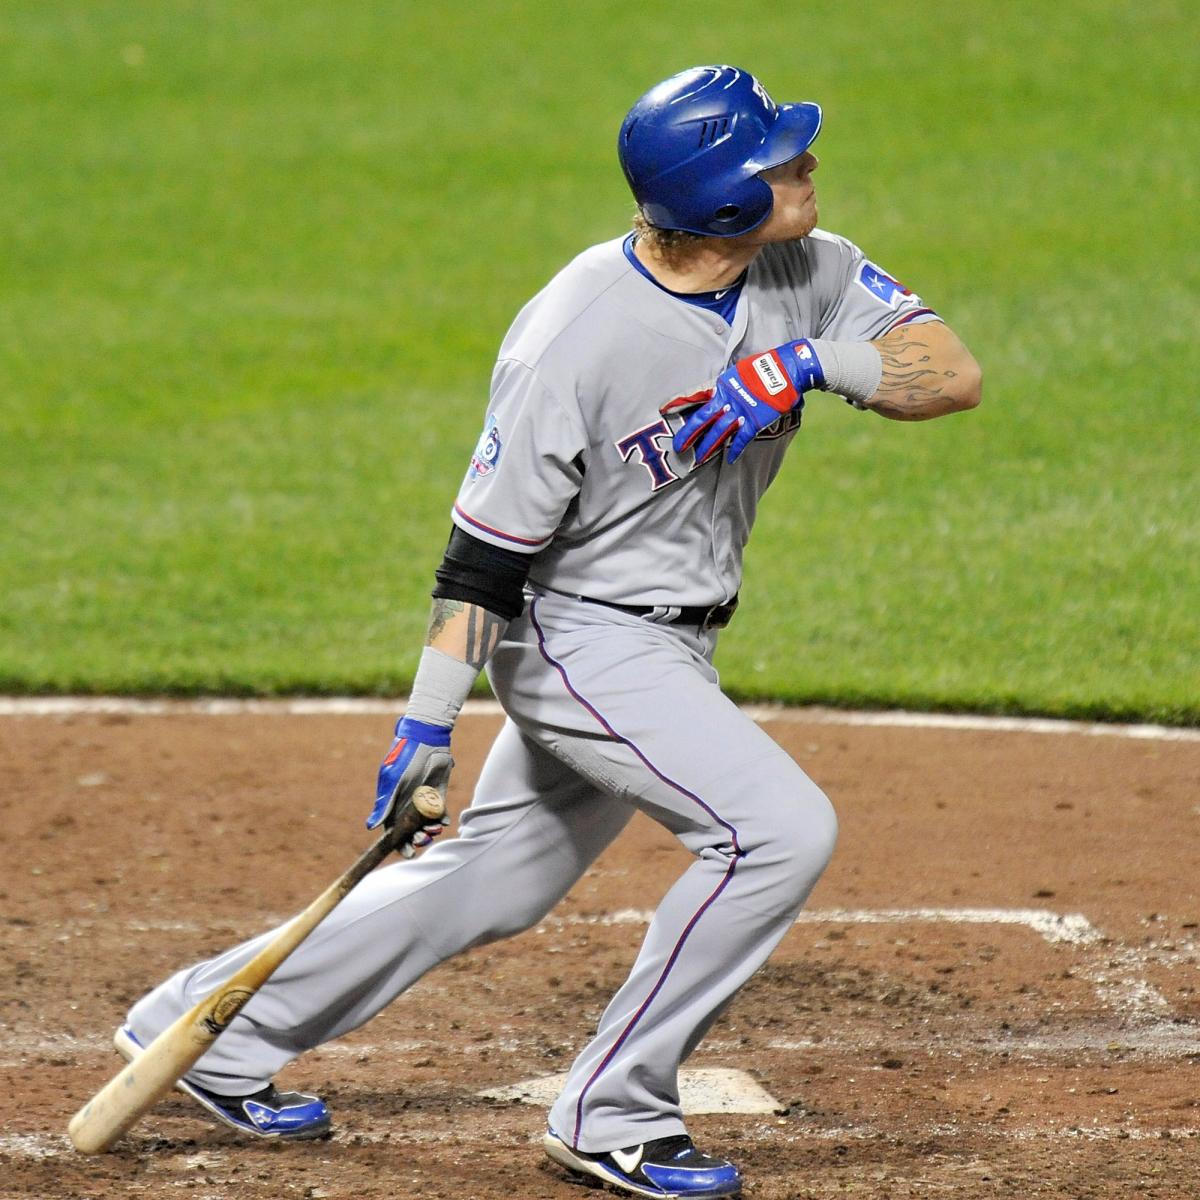 May 8, 2012: Rangers' Josh Hamilton hits four homers in one game – Society  for American Baseball Research